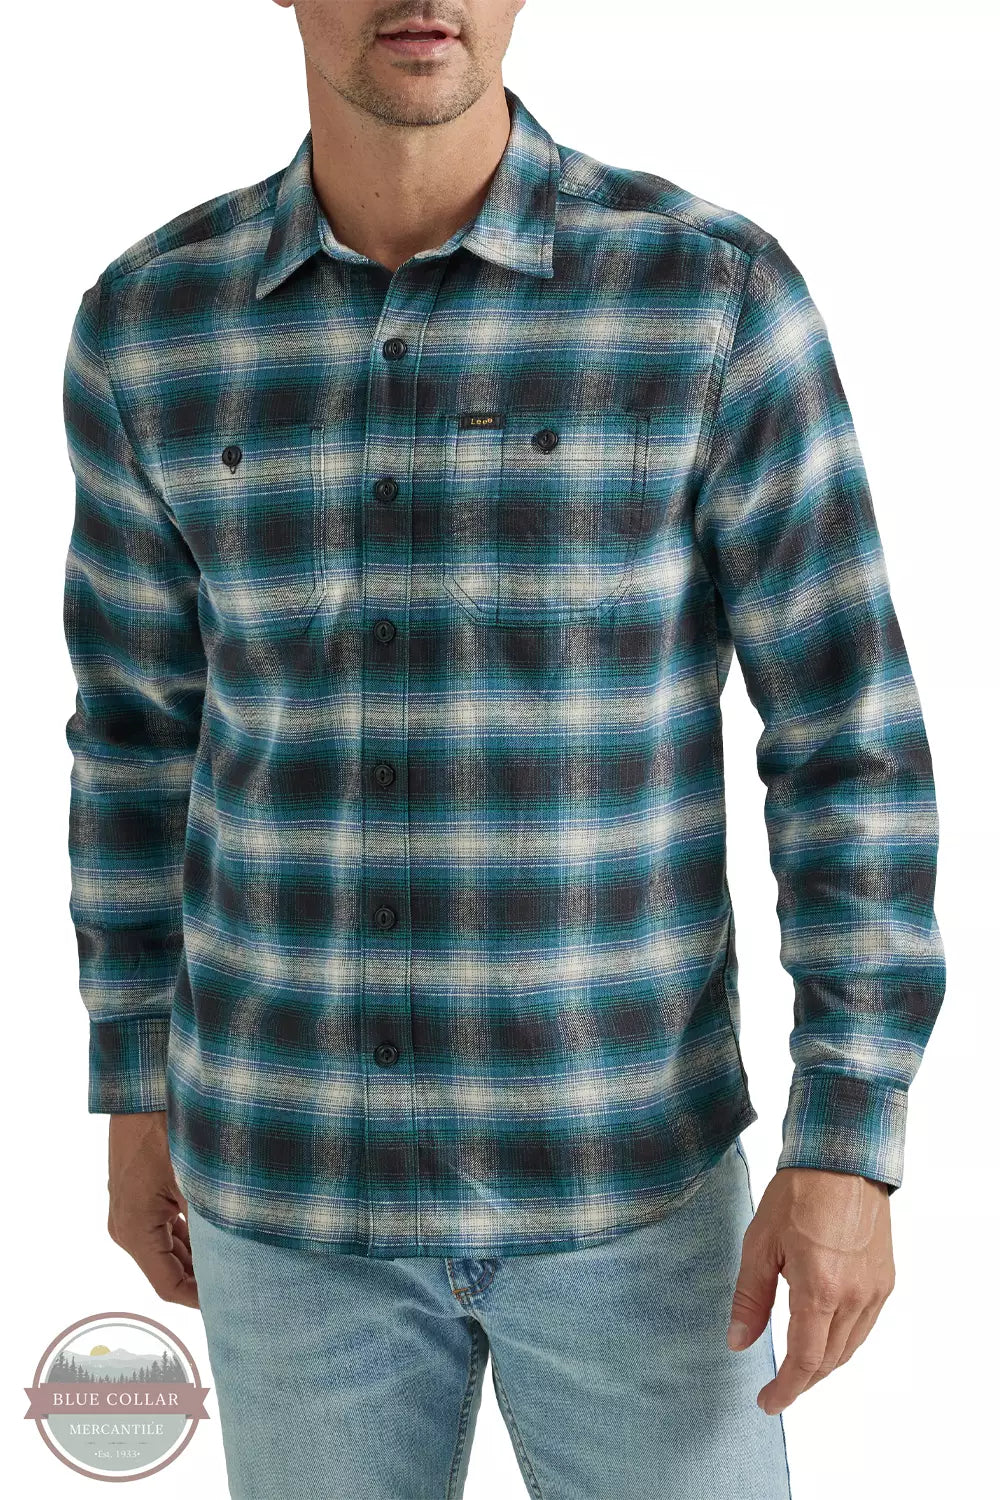 Lee 112339805 Extreme Motion Flannel Button Down Long Sleeve Shirt in Remini Plaid Front View